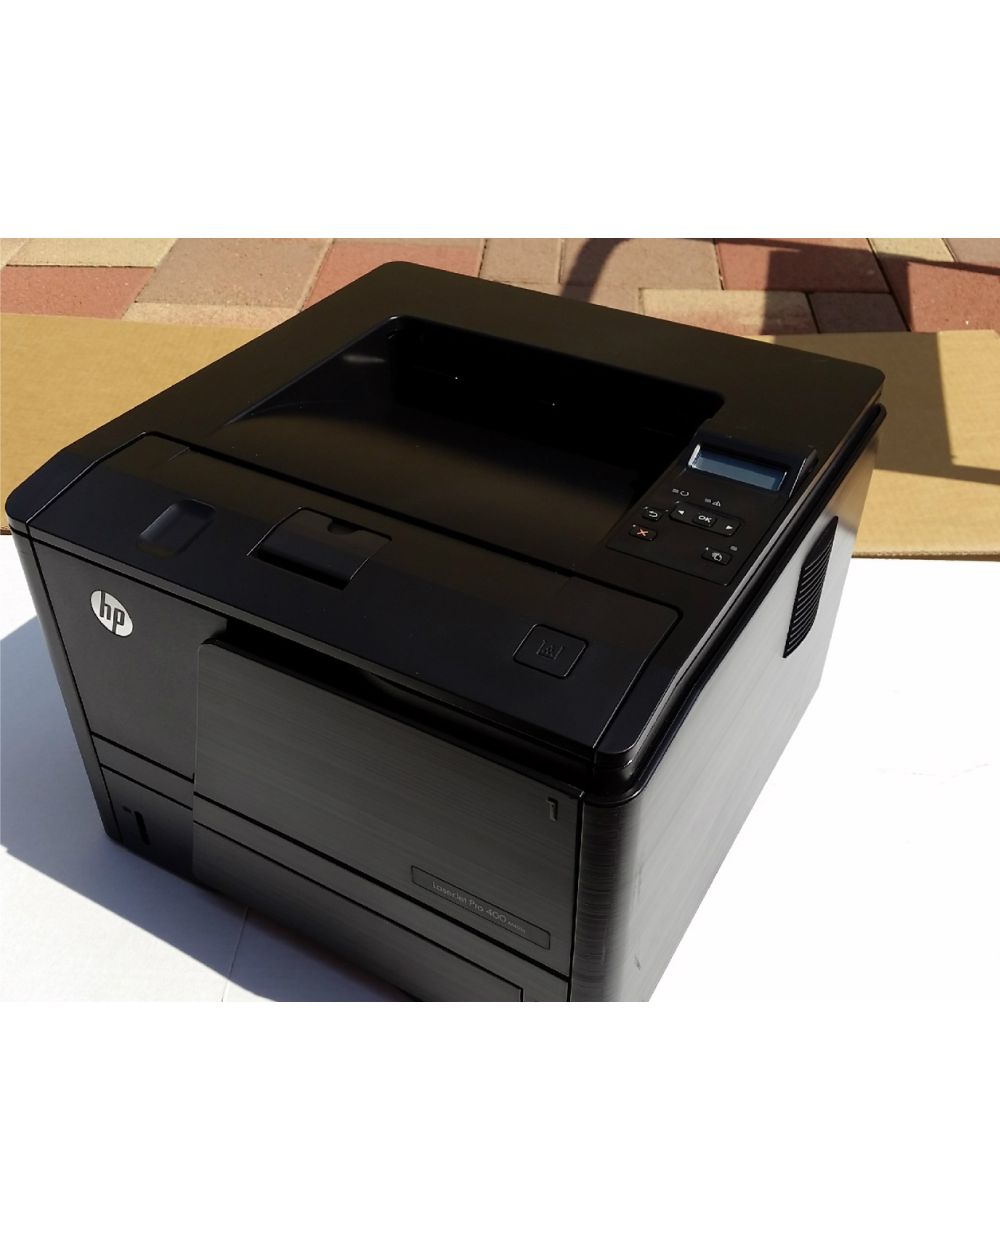 Laserjet Pro 400 M401A Driver / Good And Cheap Products ...